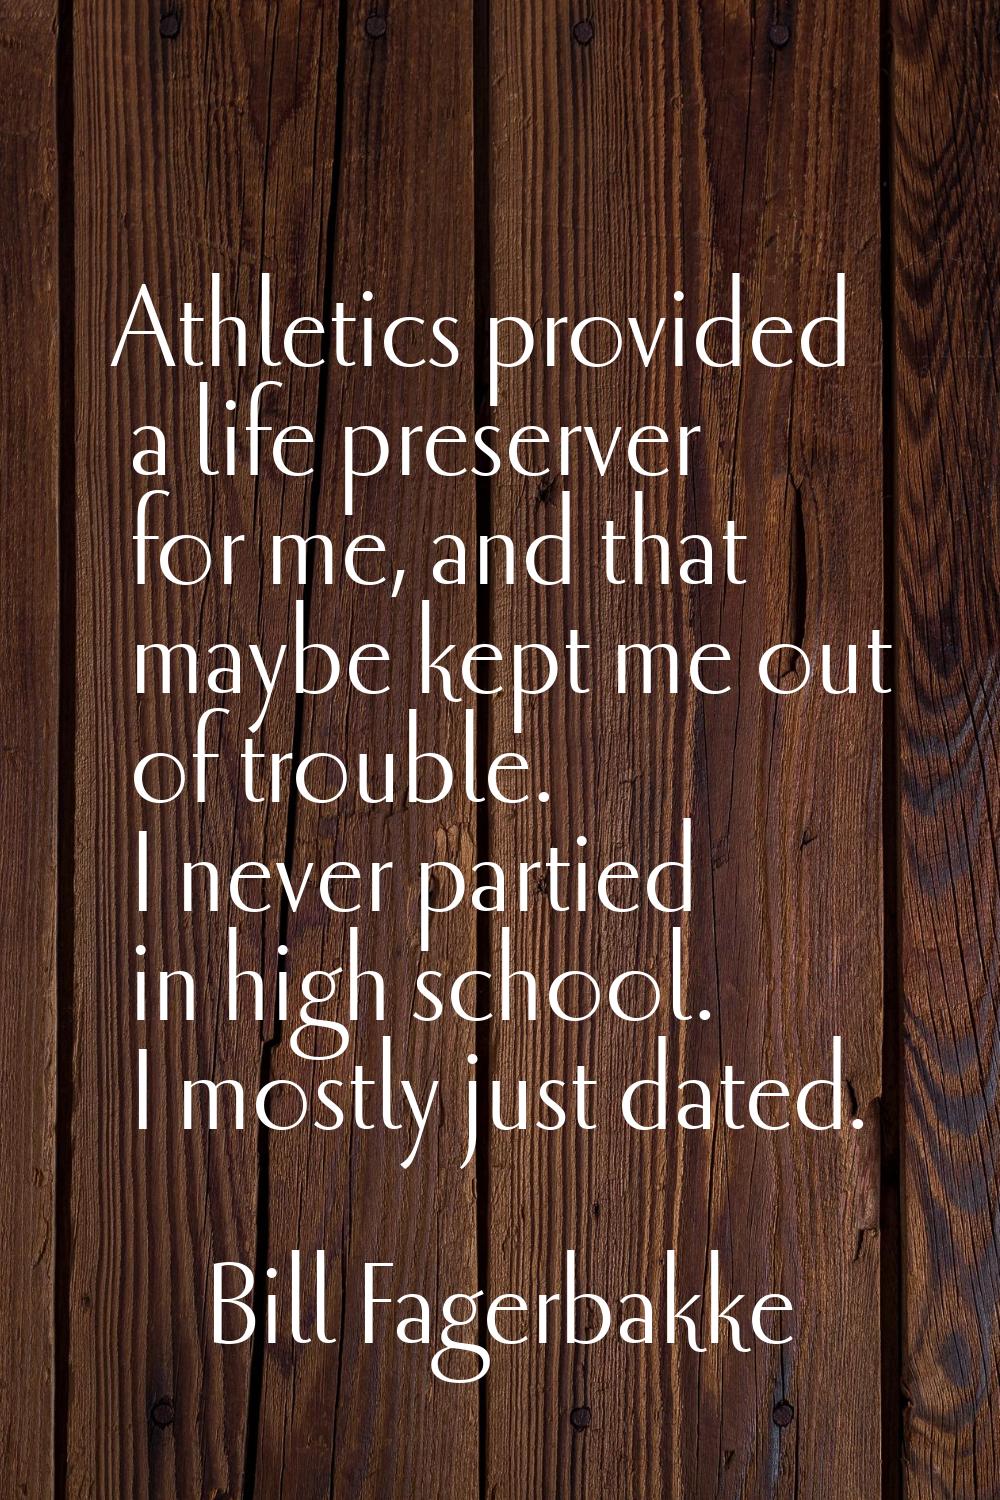 Athletics provided a life preserver for me, and that maybe kept me out of trouble. I never partied 